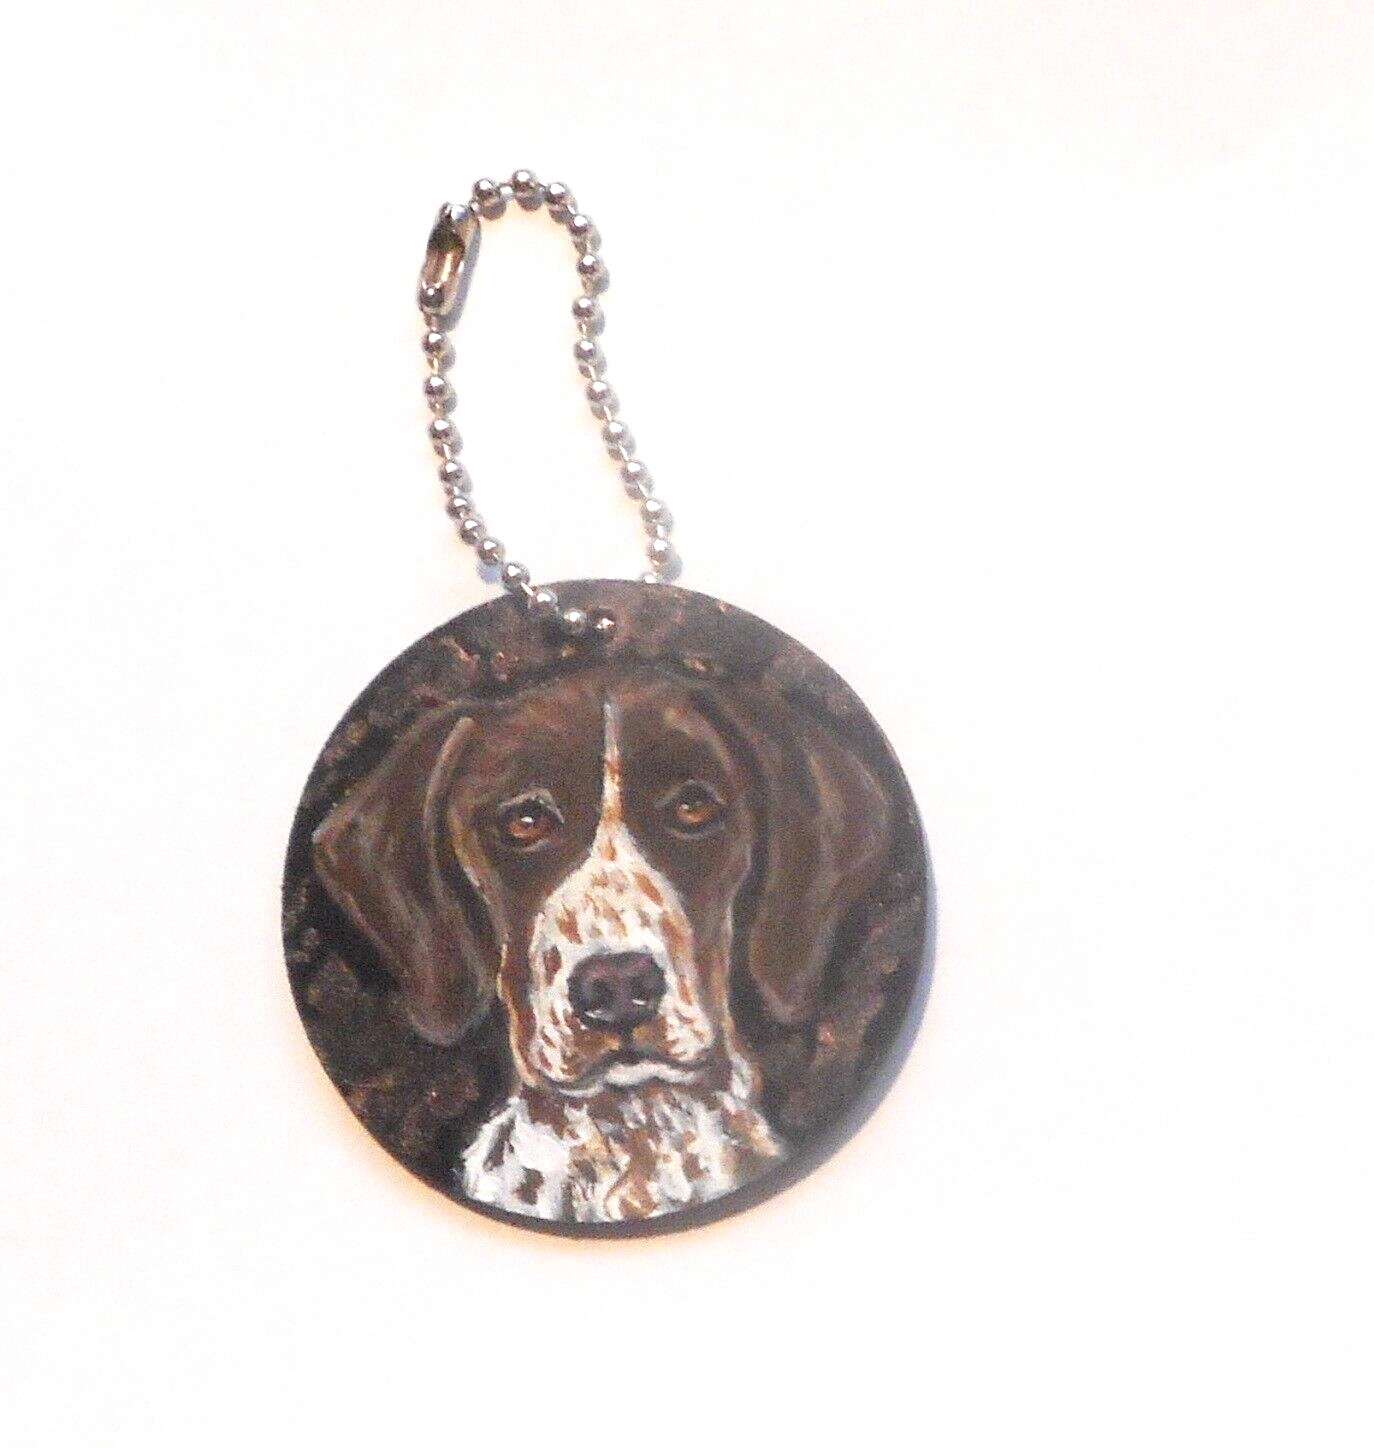 German Shorthaired Pointer Dog Keychain Hand Painted